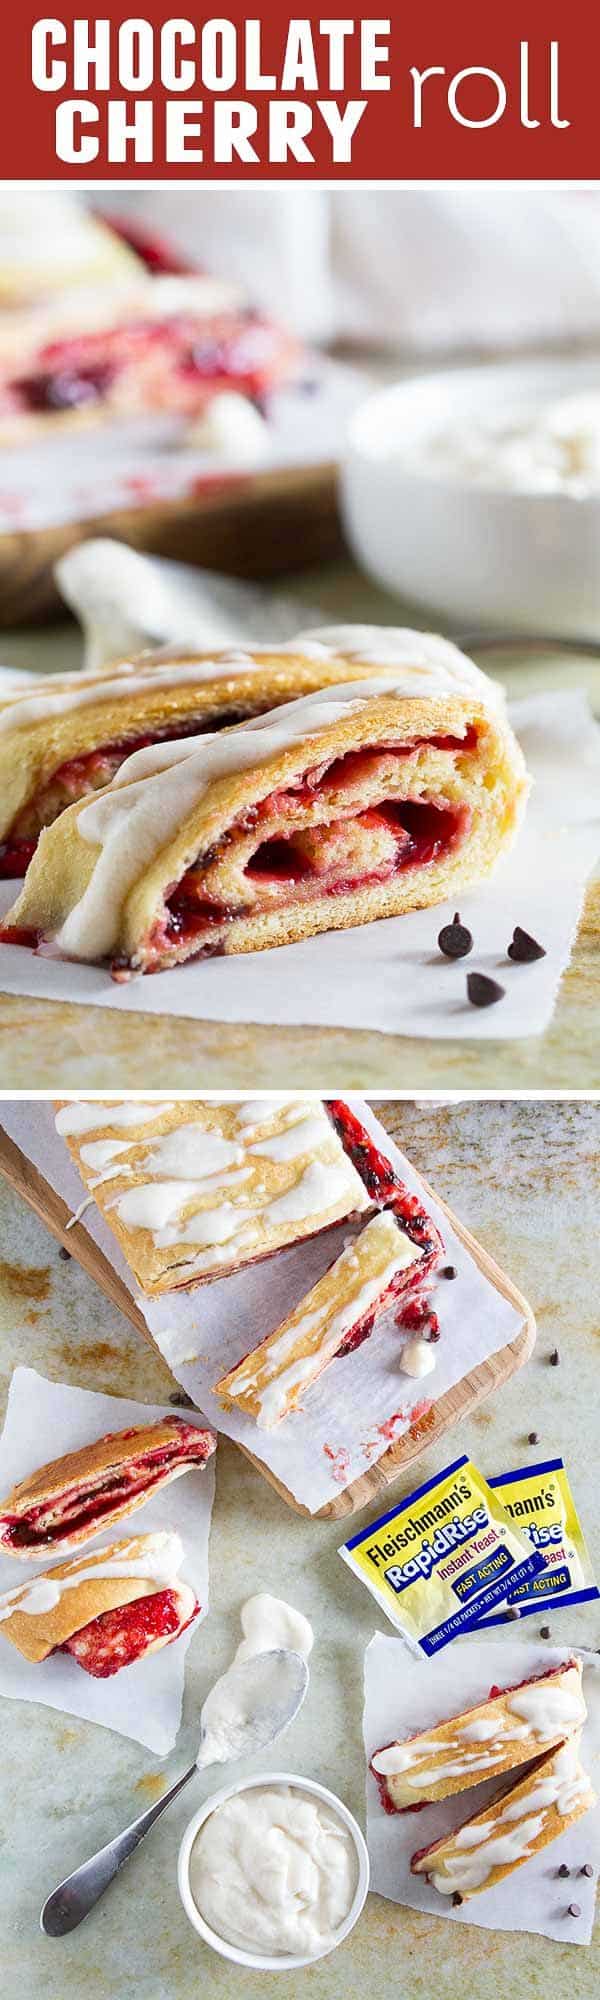 Perfect for a special breakfast or treat, this Chocolate Cherry Roll has a rich, soft dough that is filled with cherries and chocolate chips. Serve up slices as part of a brunch spread or just for a sweet treat.